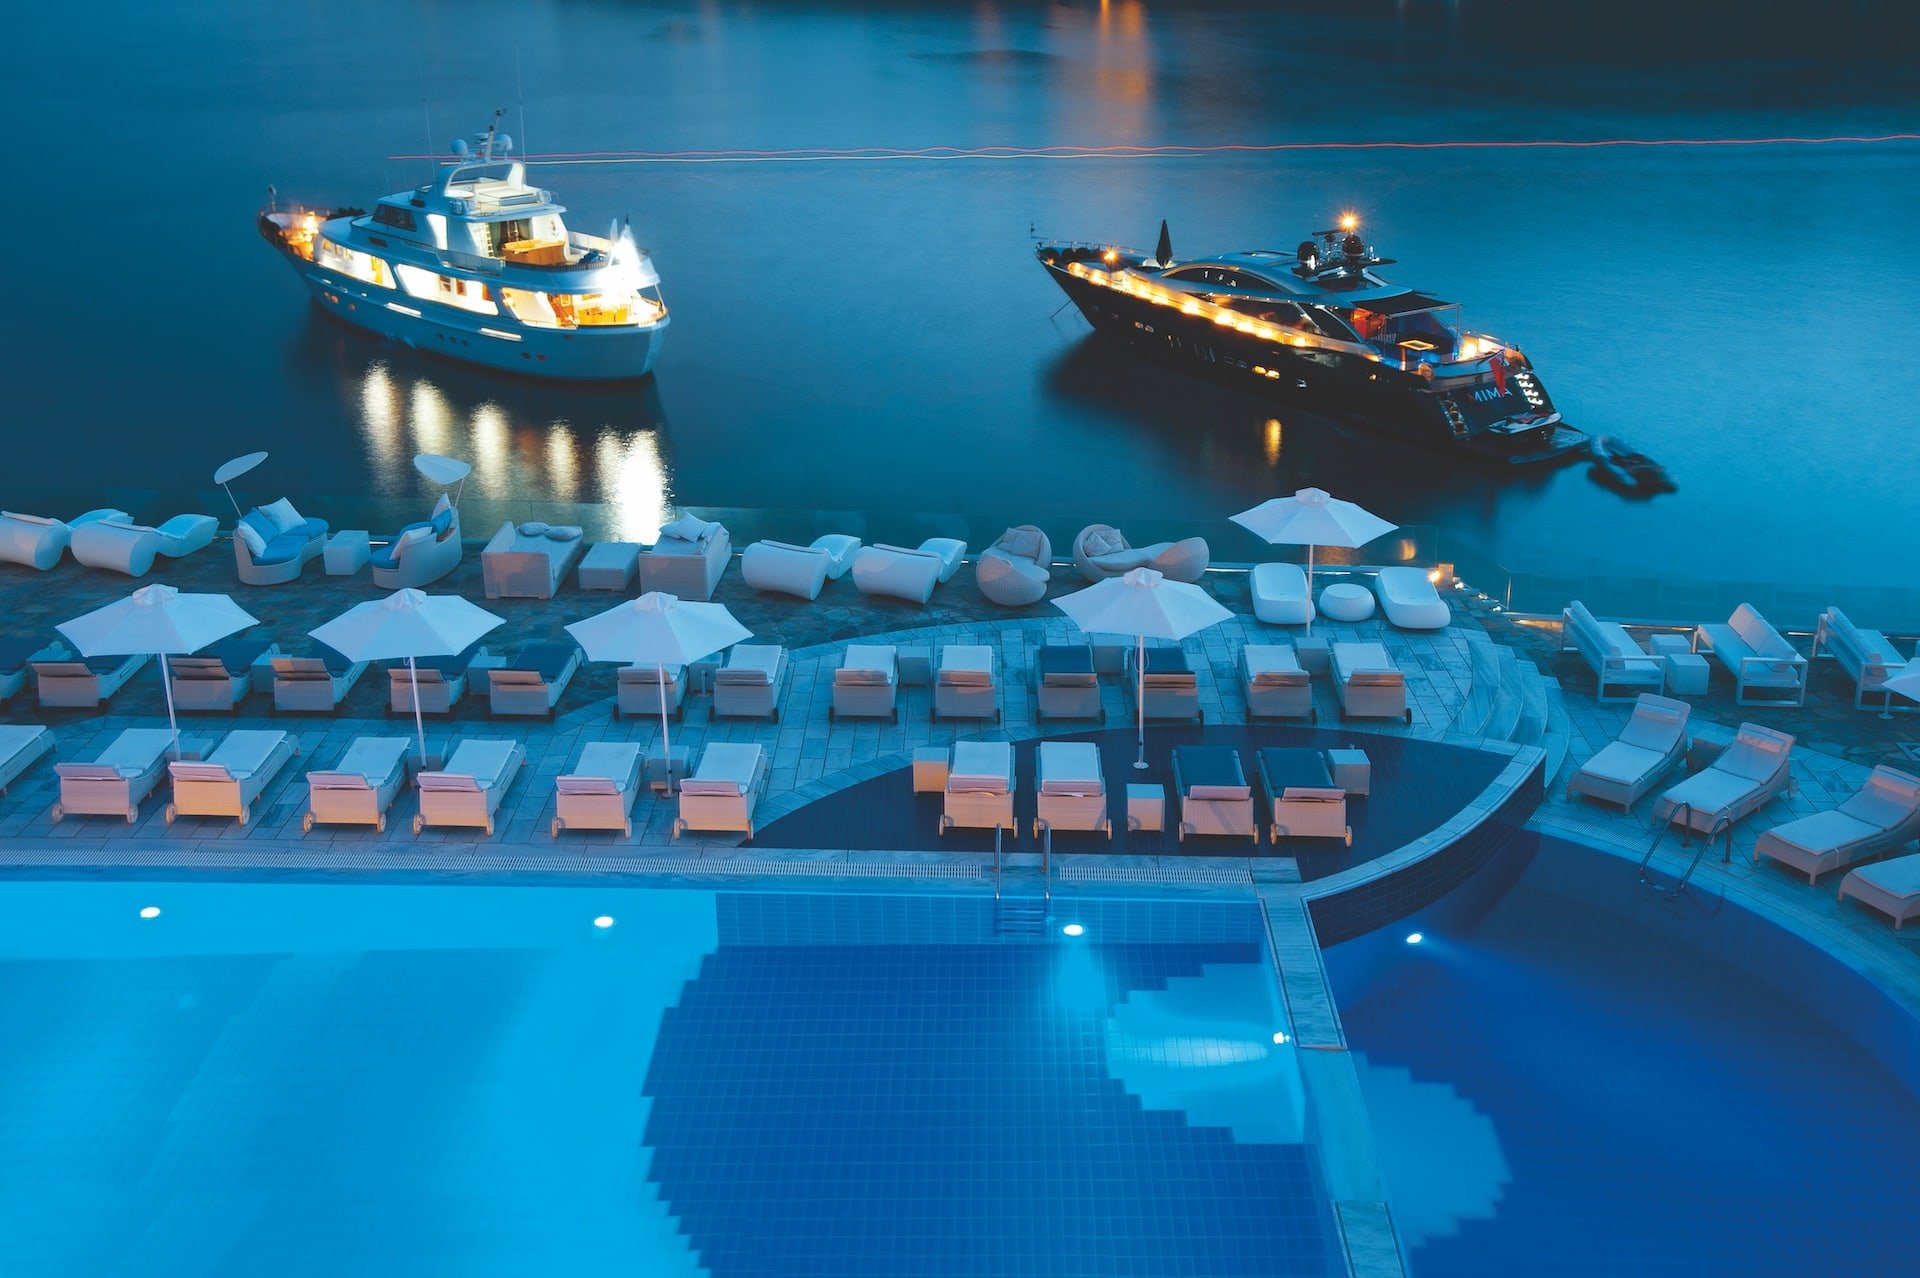 Tranquil poolside view at Petasos Hotel and spa in Mykonos, with boats adding a touch of romance under the starry sky.